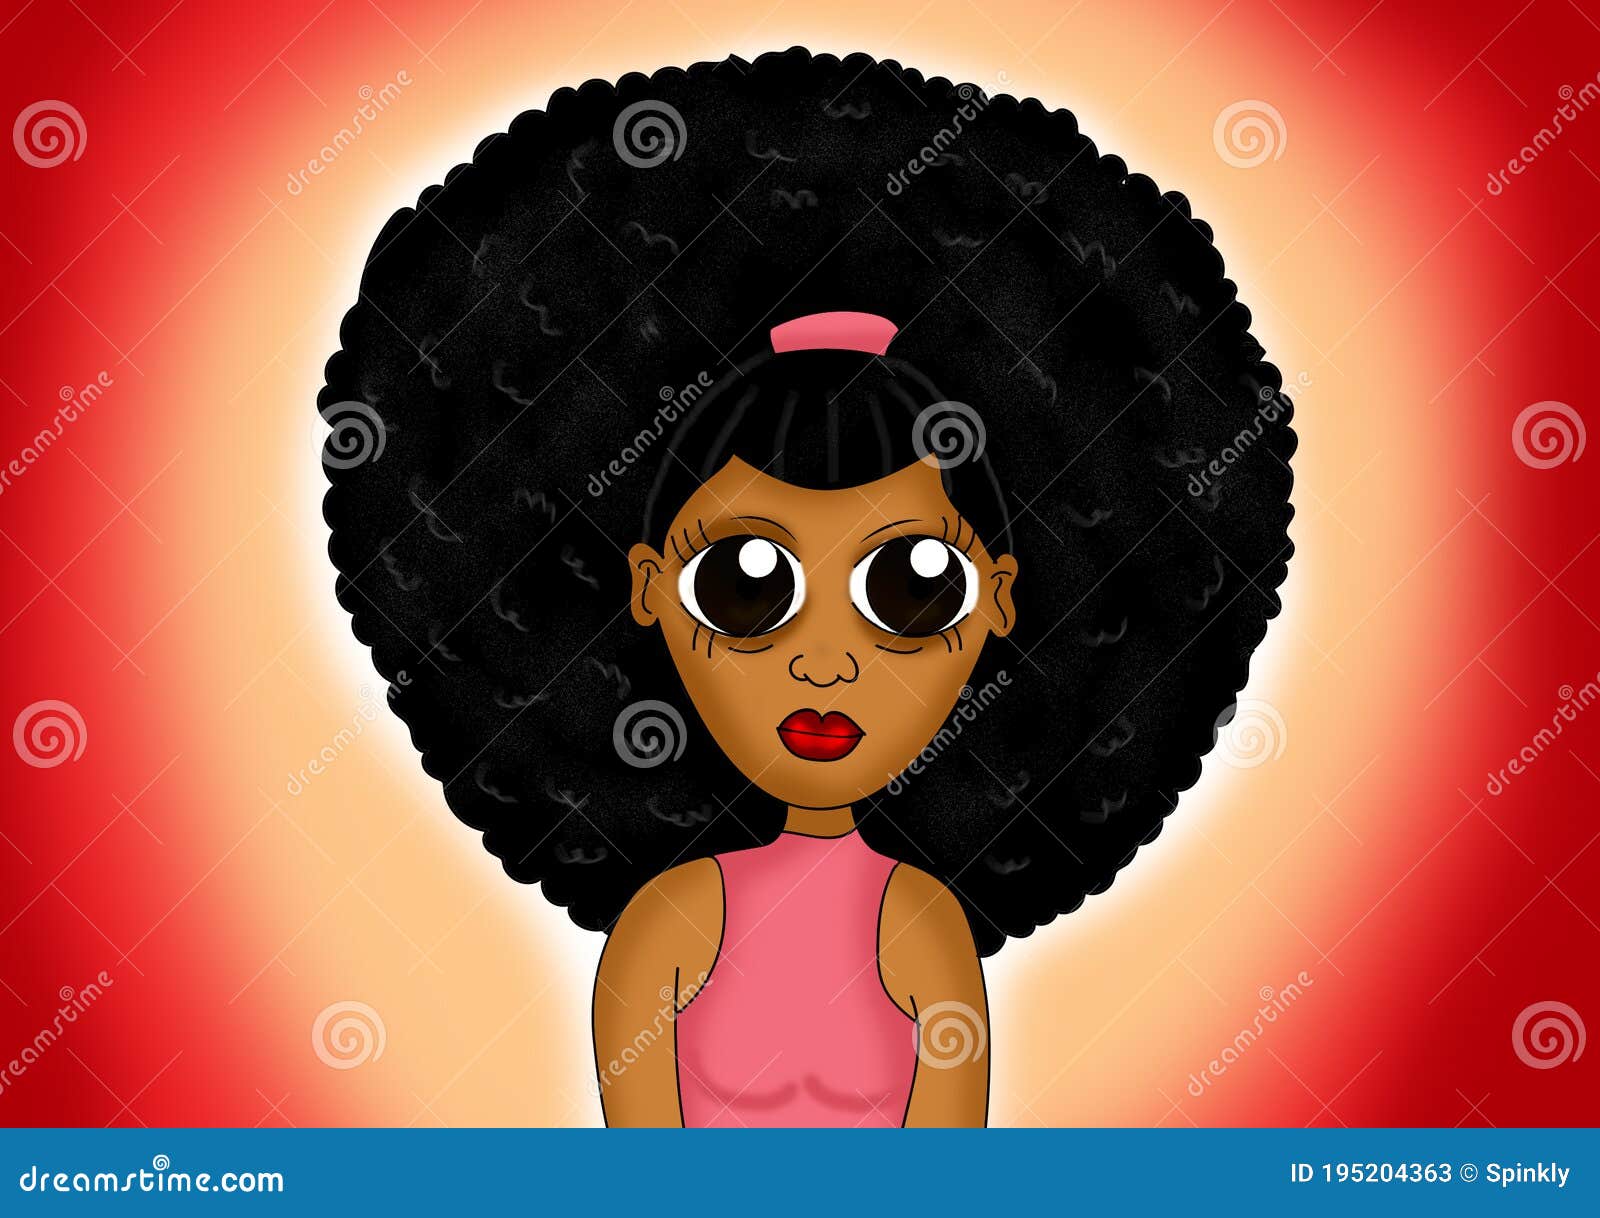 Black Girl Cartoon with Afro Hair Stock Image - Image of highway, signage:  195204363